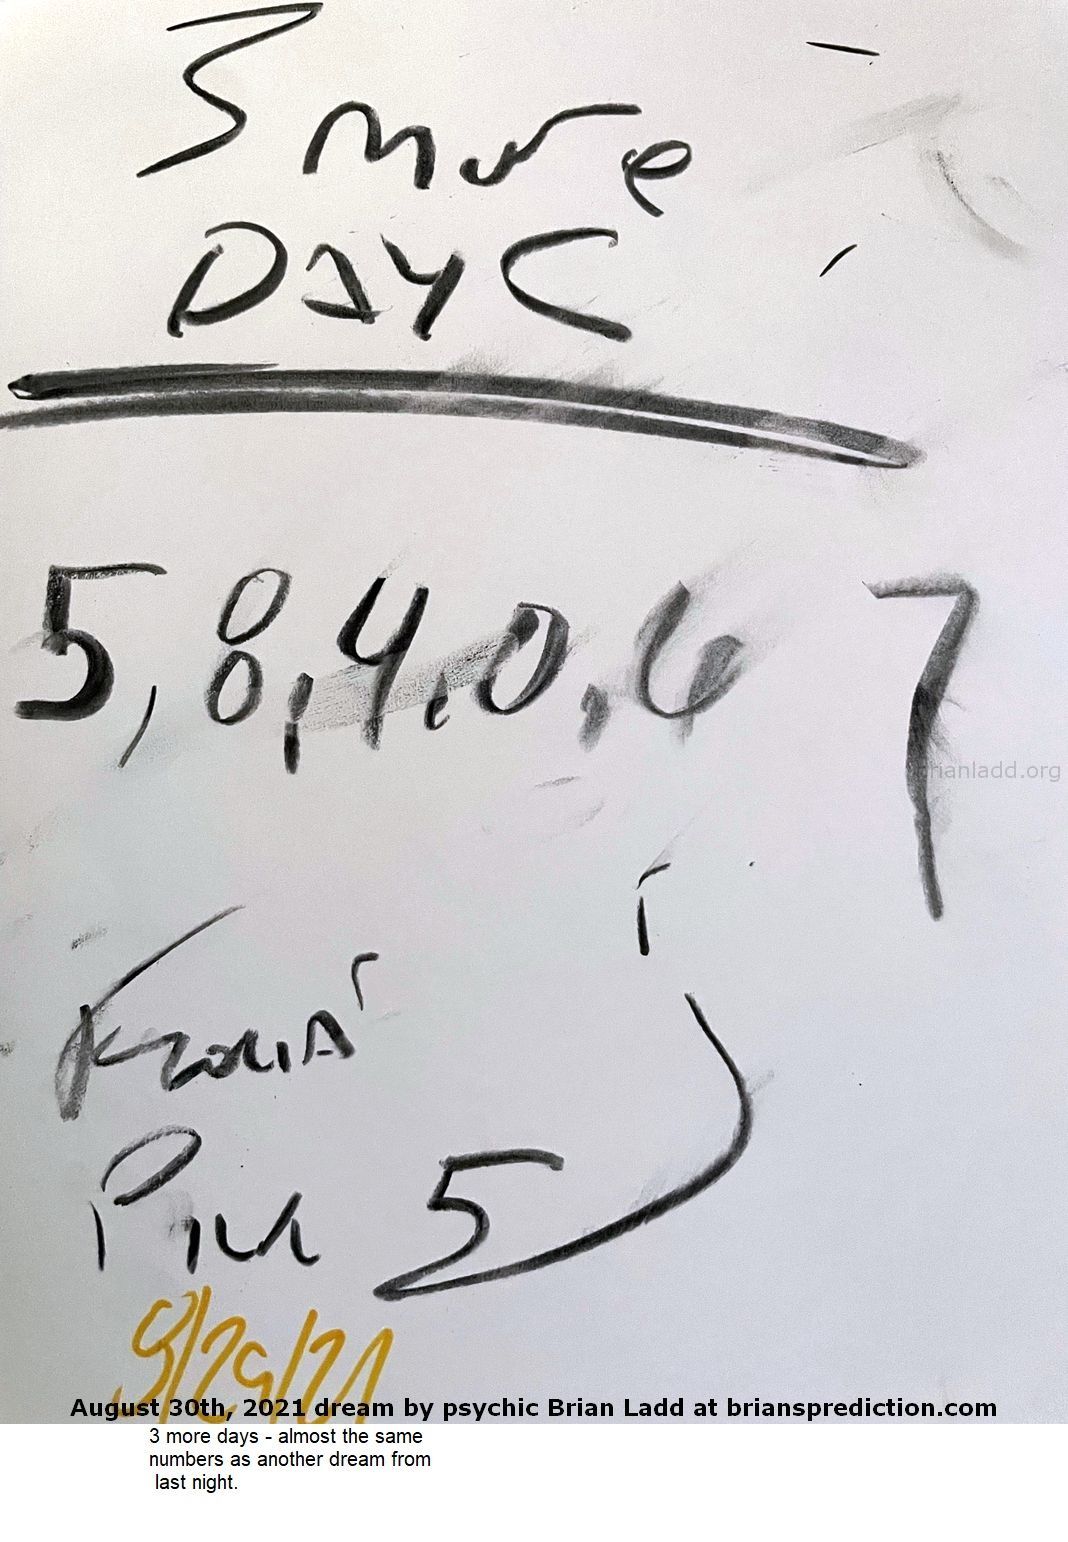 29 August 2021 6 3 more days - almost the same numbers as another dream from last night...
3 more days - almost the same numbers as another dream from last night.
